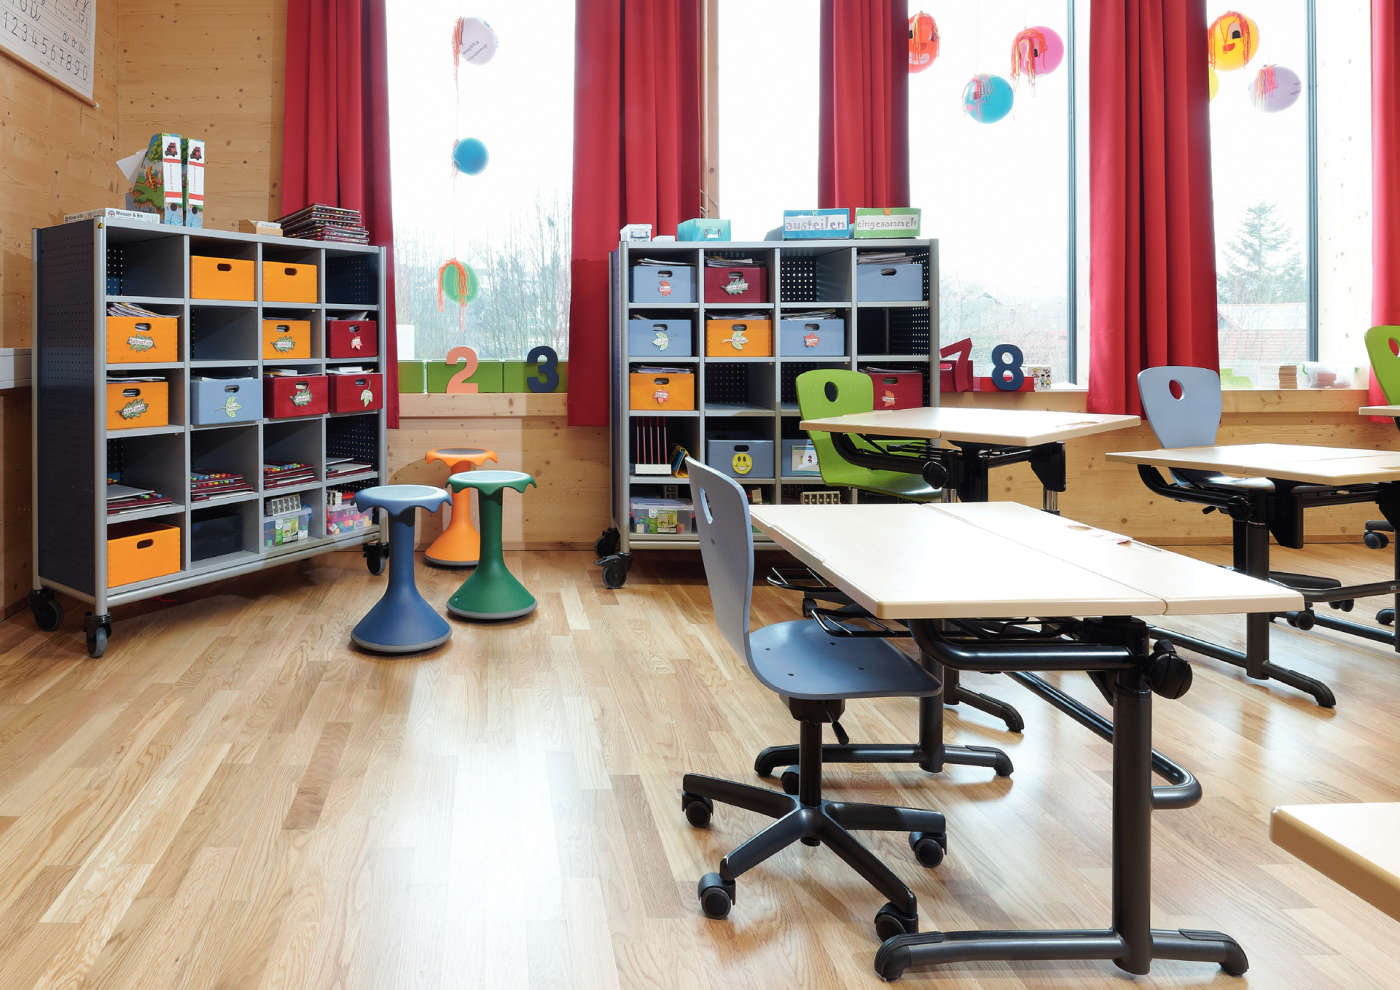 Furniture to fit pupils.